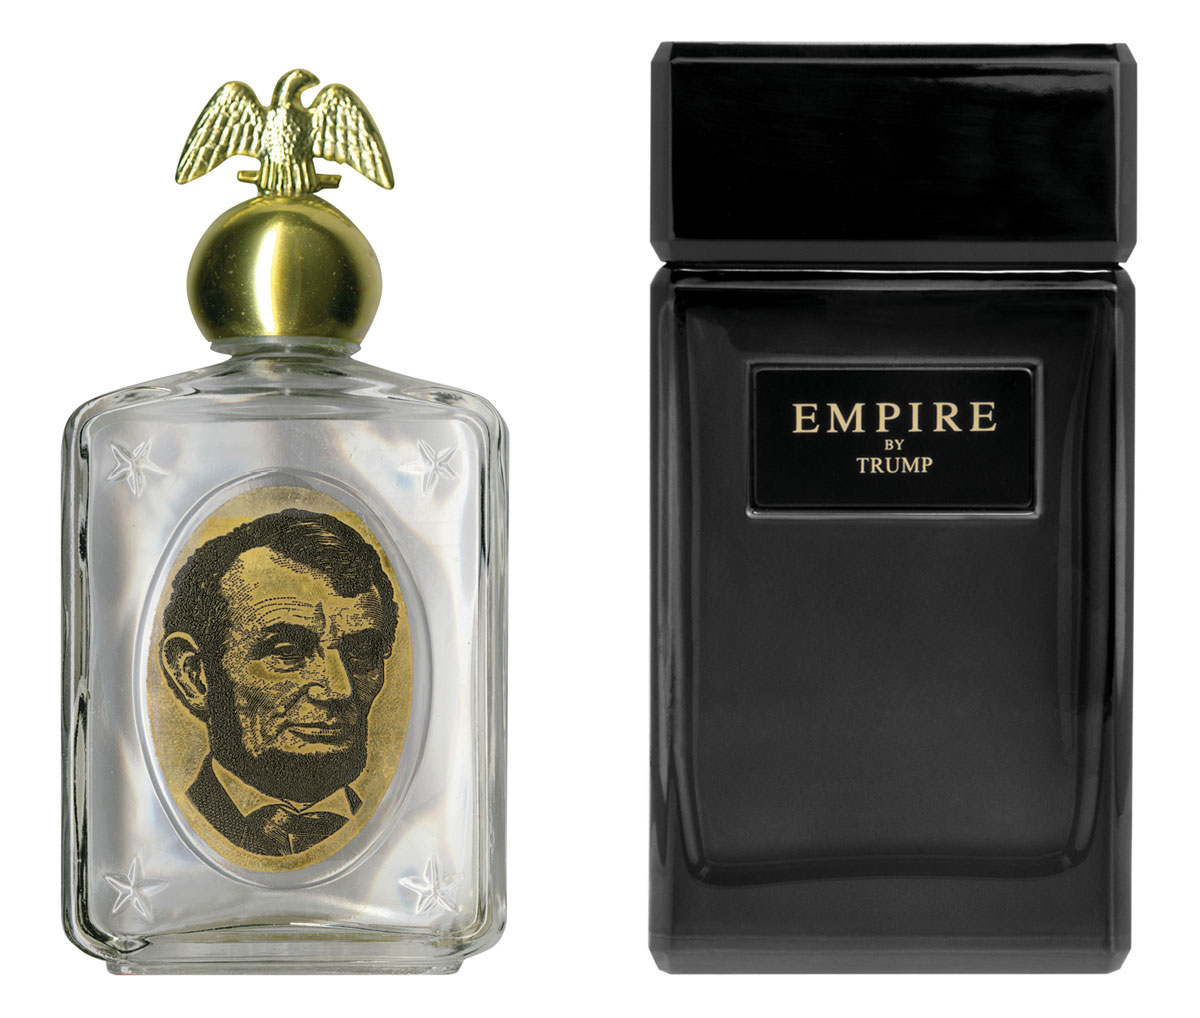 A photograph of an Avon “Abraham Lincoln” cologne next to an Empire by Trump cologne.